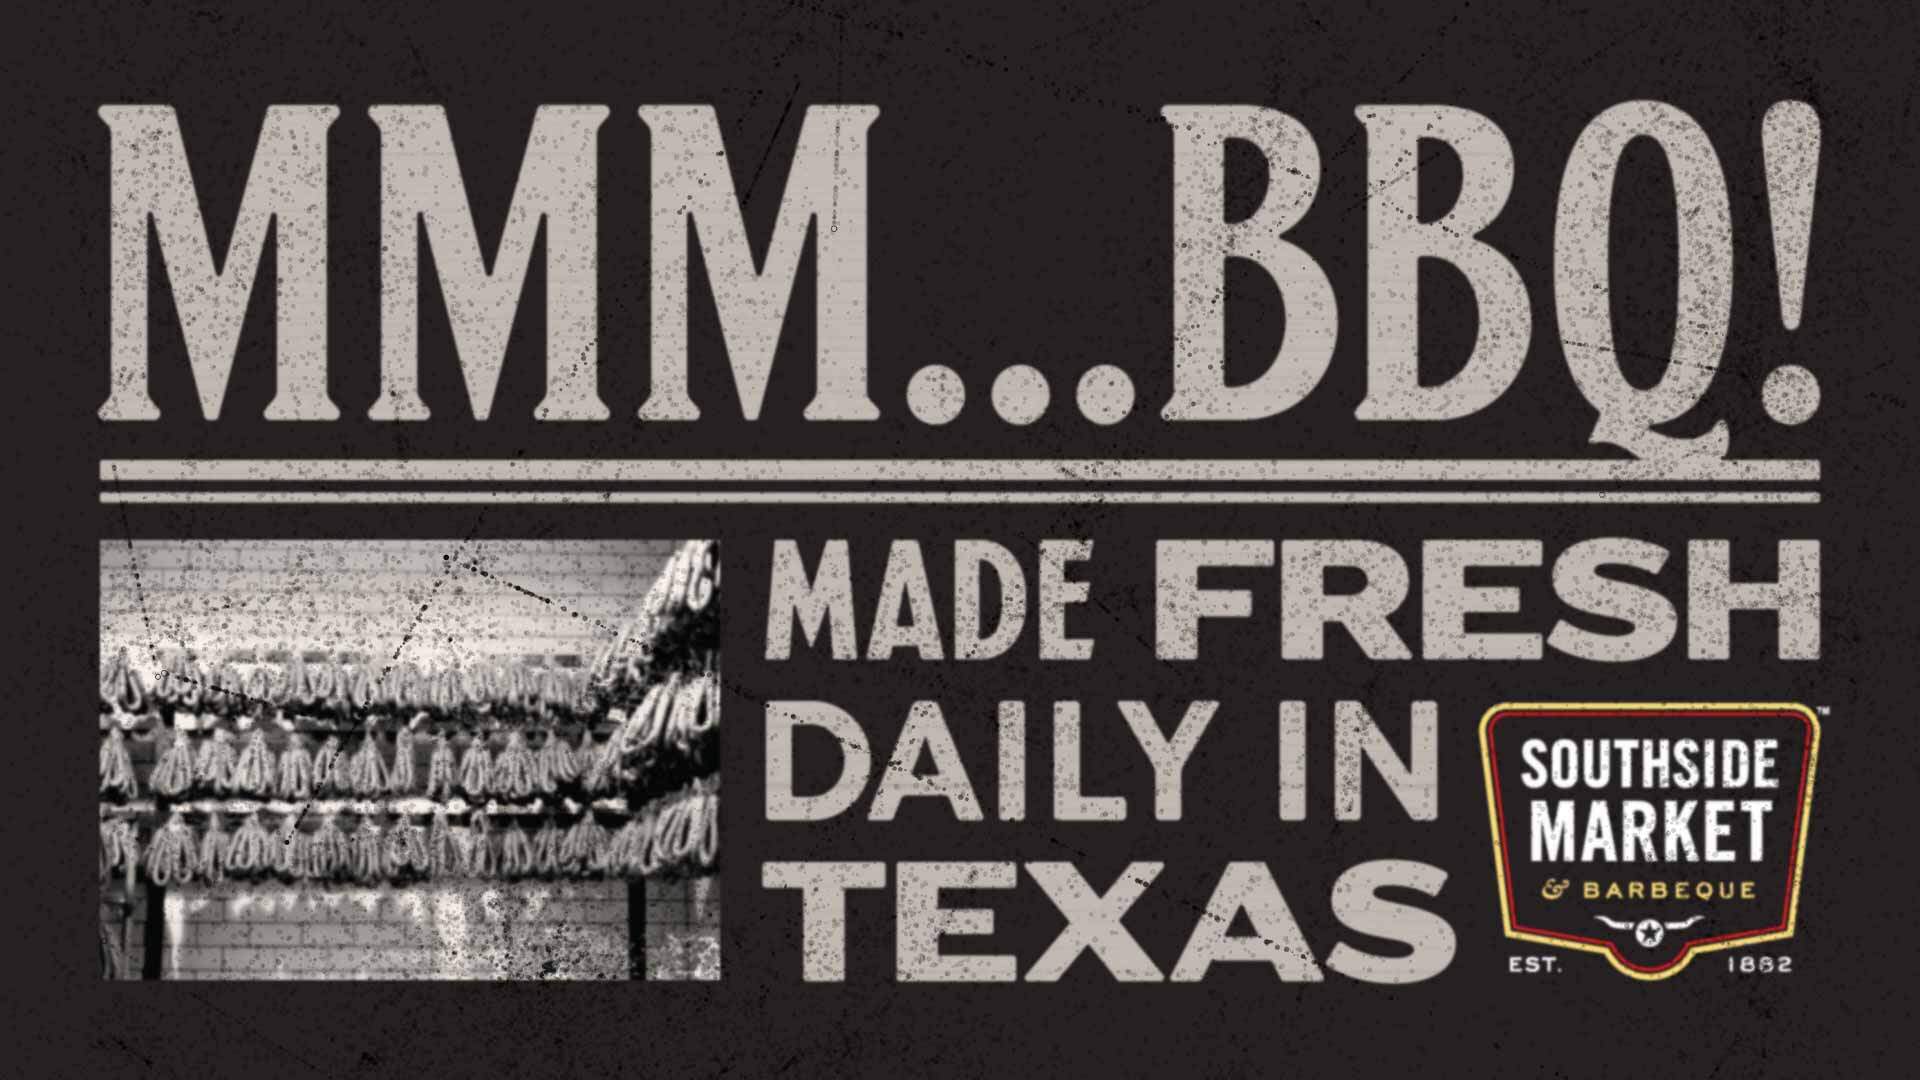 Key graphic design example as part of the brand update of Southside Market & Barbeque which reads "MMM...BBQ! MADE FRESH DAILY IN TEXAS"